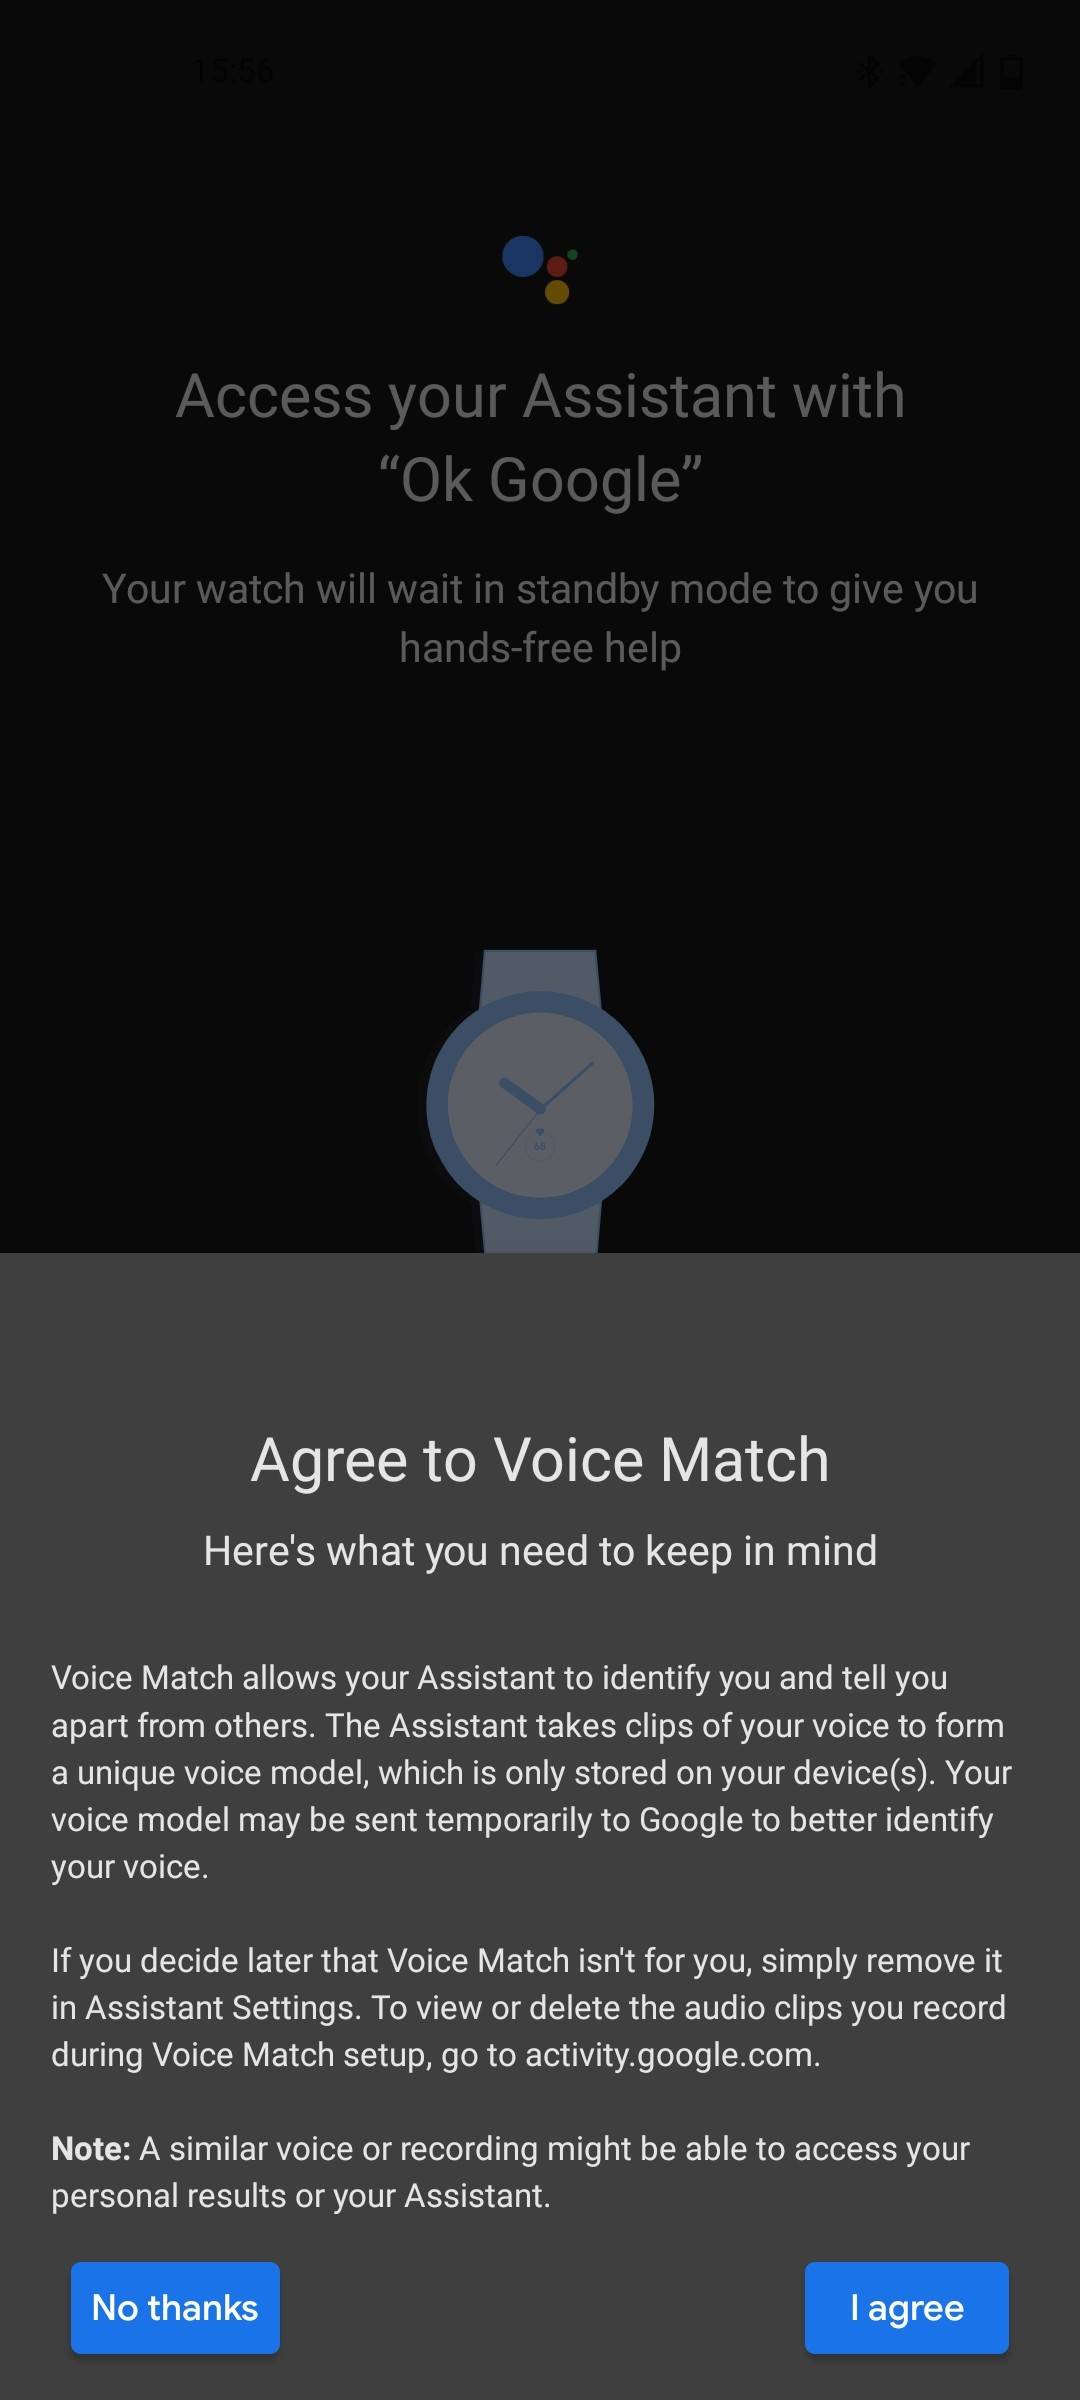 prompt to agree to voice match setup